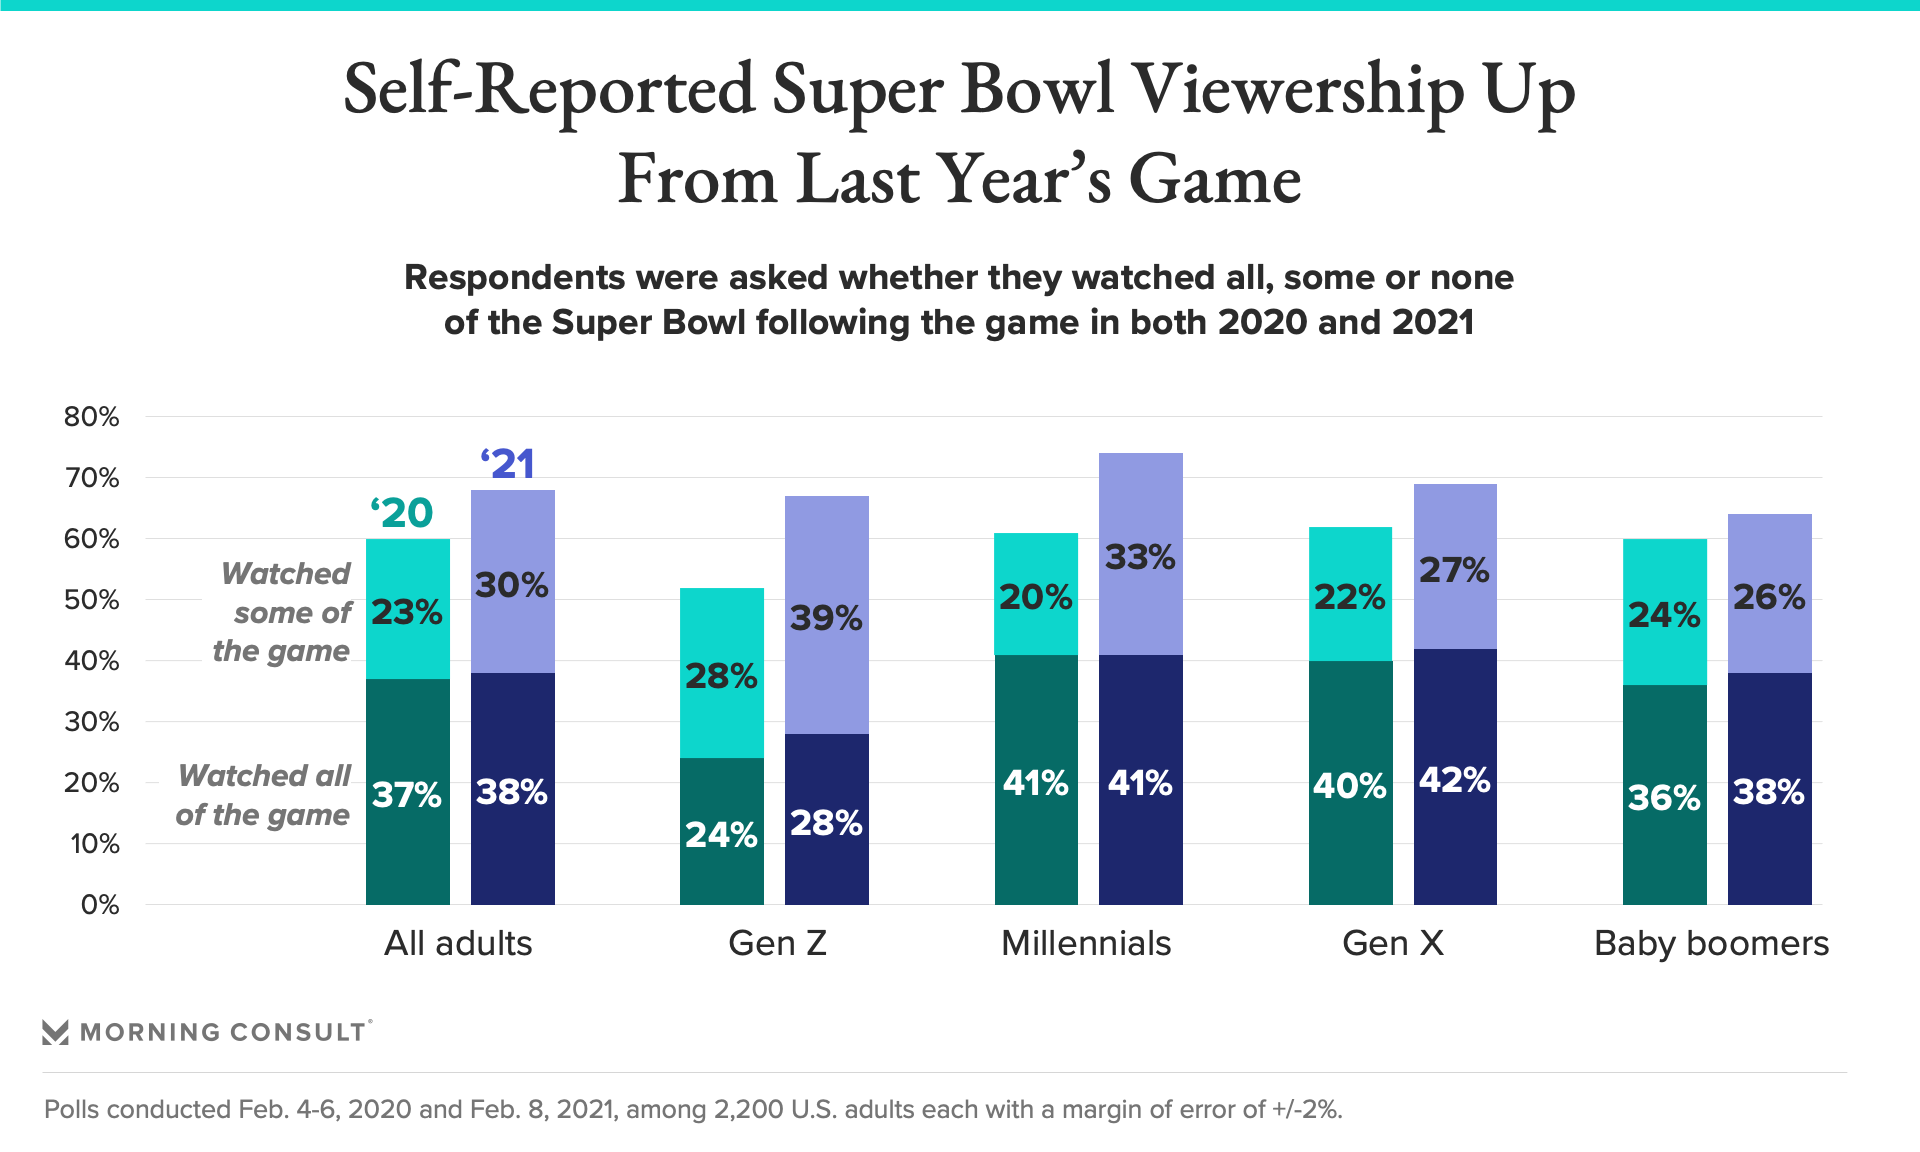 Super Bowl Sees Increase in SelfReported Viewership From Last Year’s Game